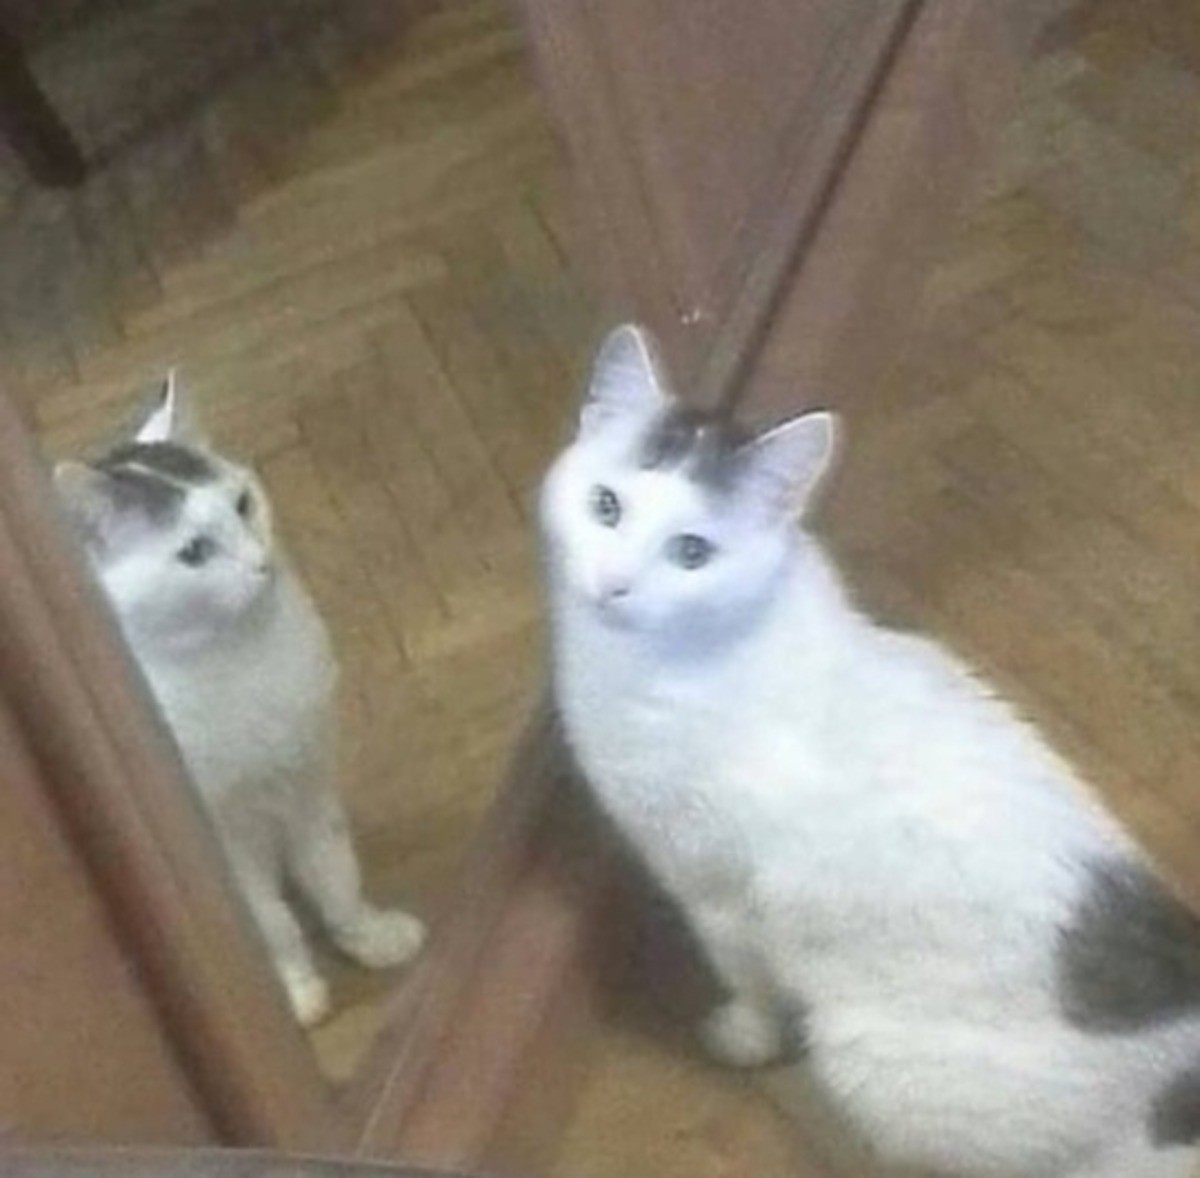 Cursed Reflection